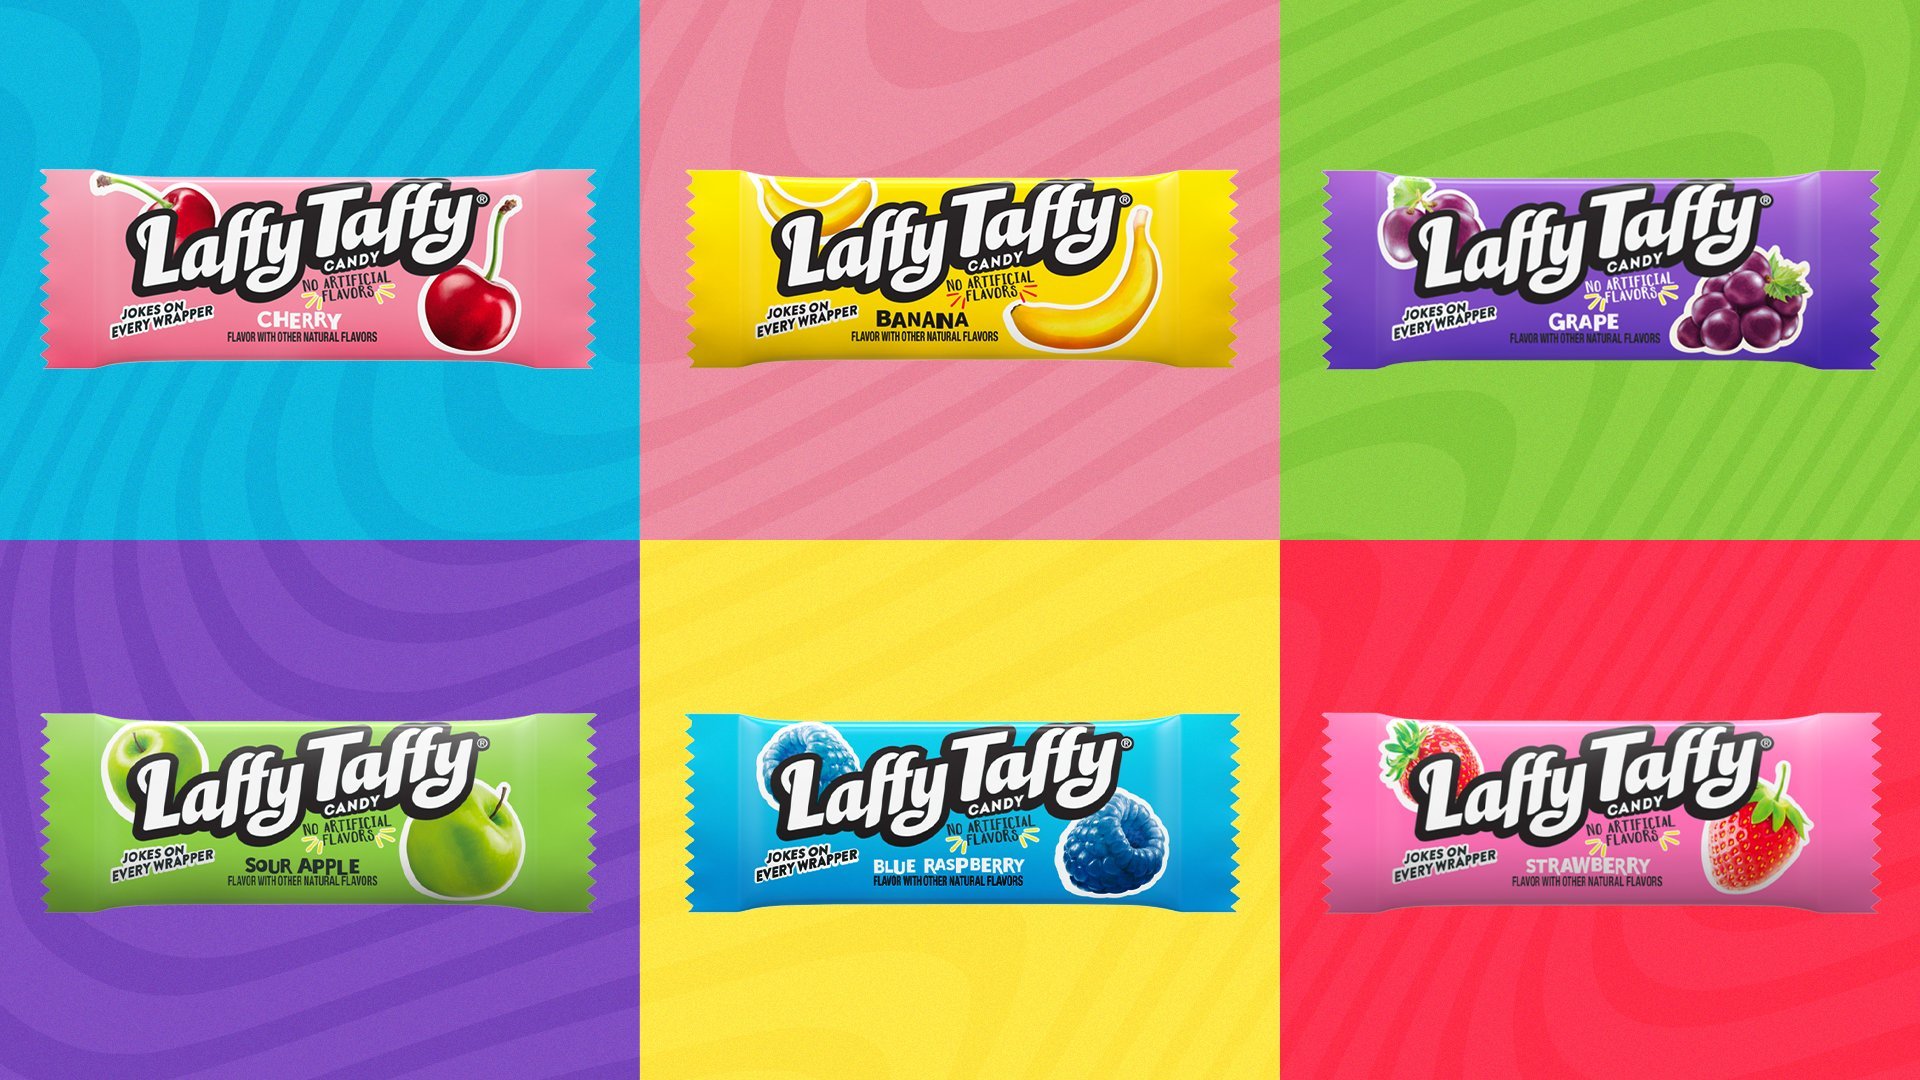 Laffy Taffy For Grape? Find Banana A Peel Ing? Laffy Taffy Minis Come In Six Fruity Flavors And Have A Joke On Every Wrapper!